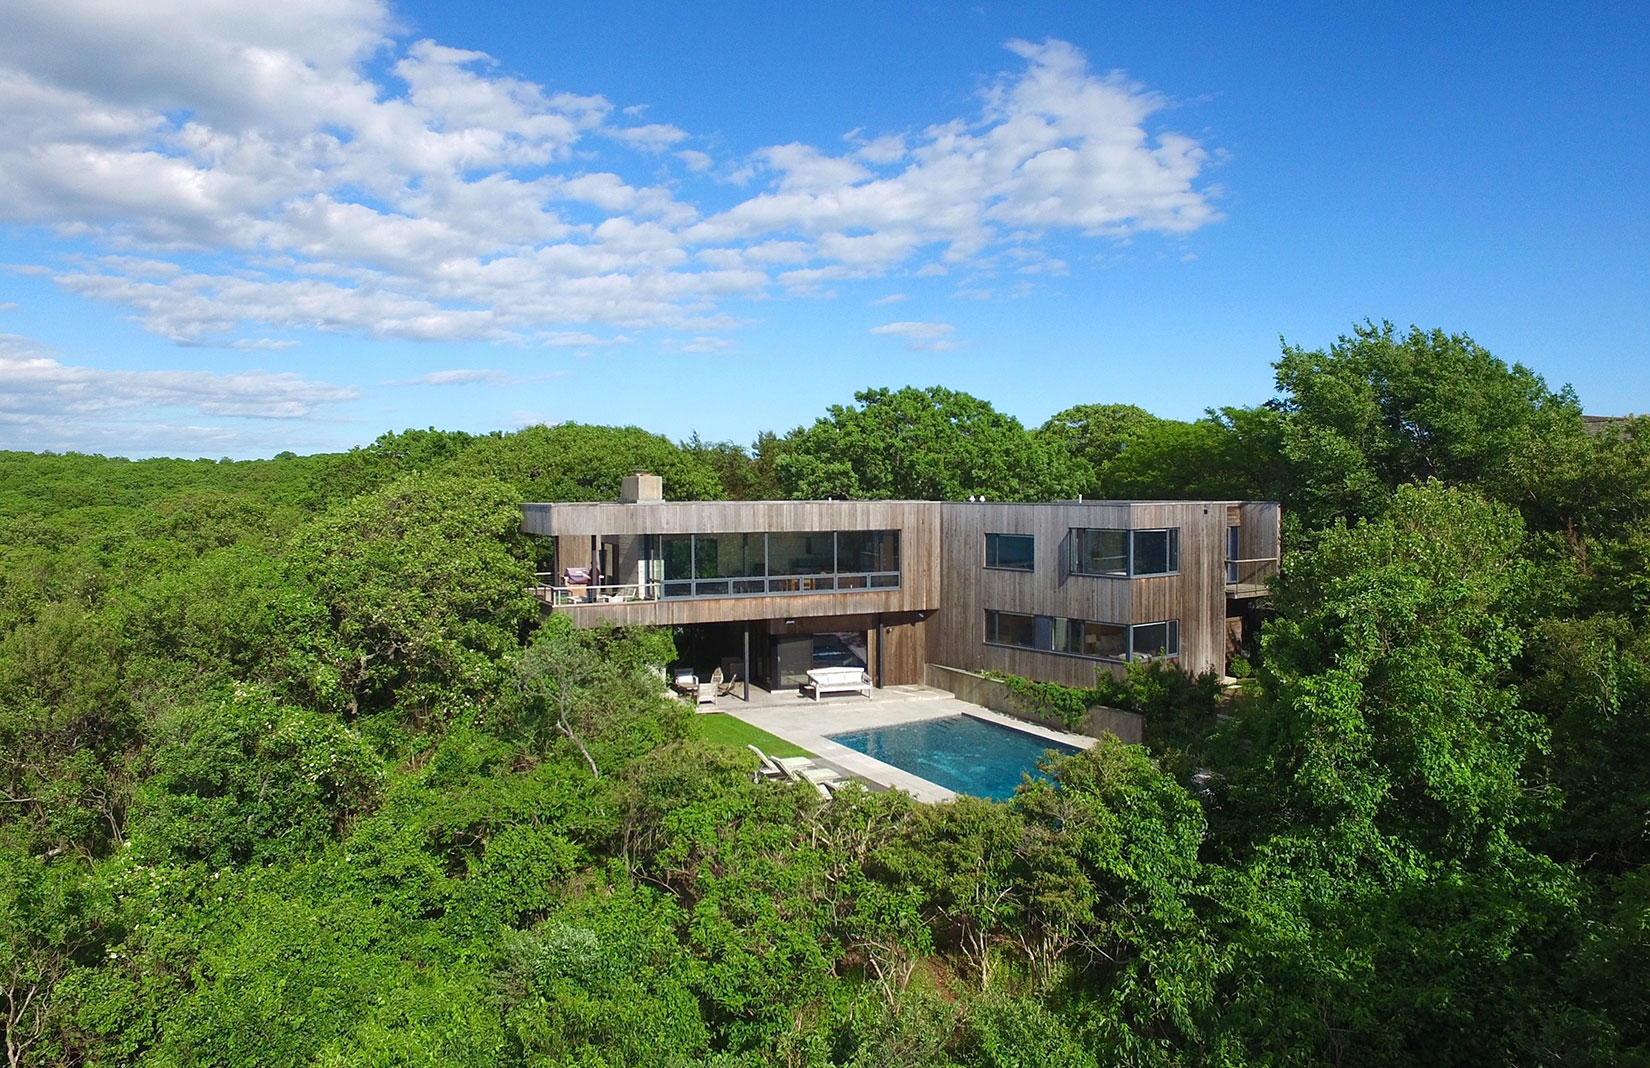 A modern Montauk house surrounded by nature lists for $5.45m